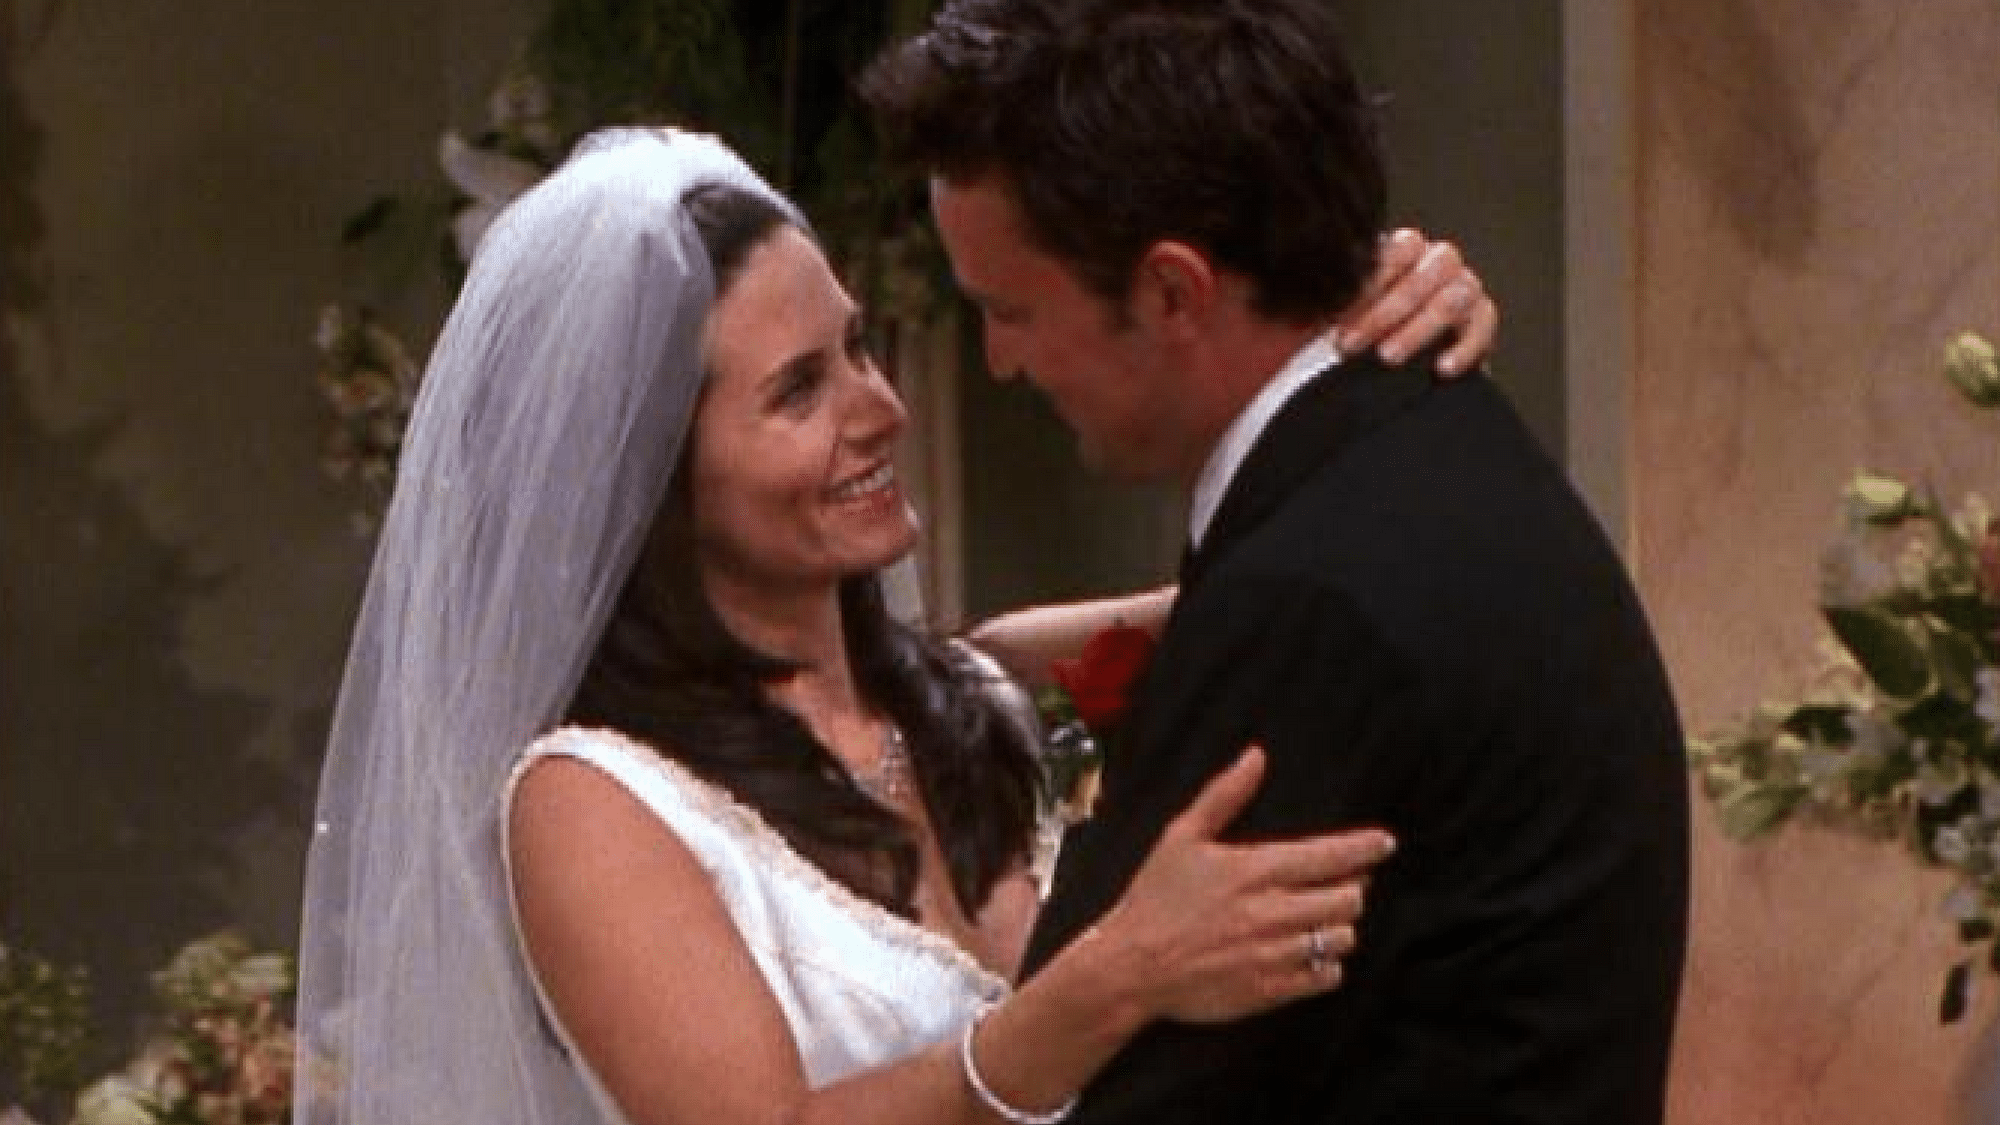 Can you cut out the marriage shaming already? (Photo Courtesy: <a href="http://friends.wikia.com/wiki/The_One_With_Monica_And_Chandler's_Wedding,_Part_2">friends.wikia.com</a>)